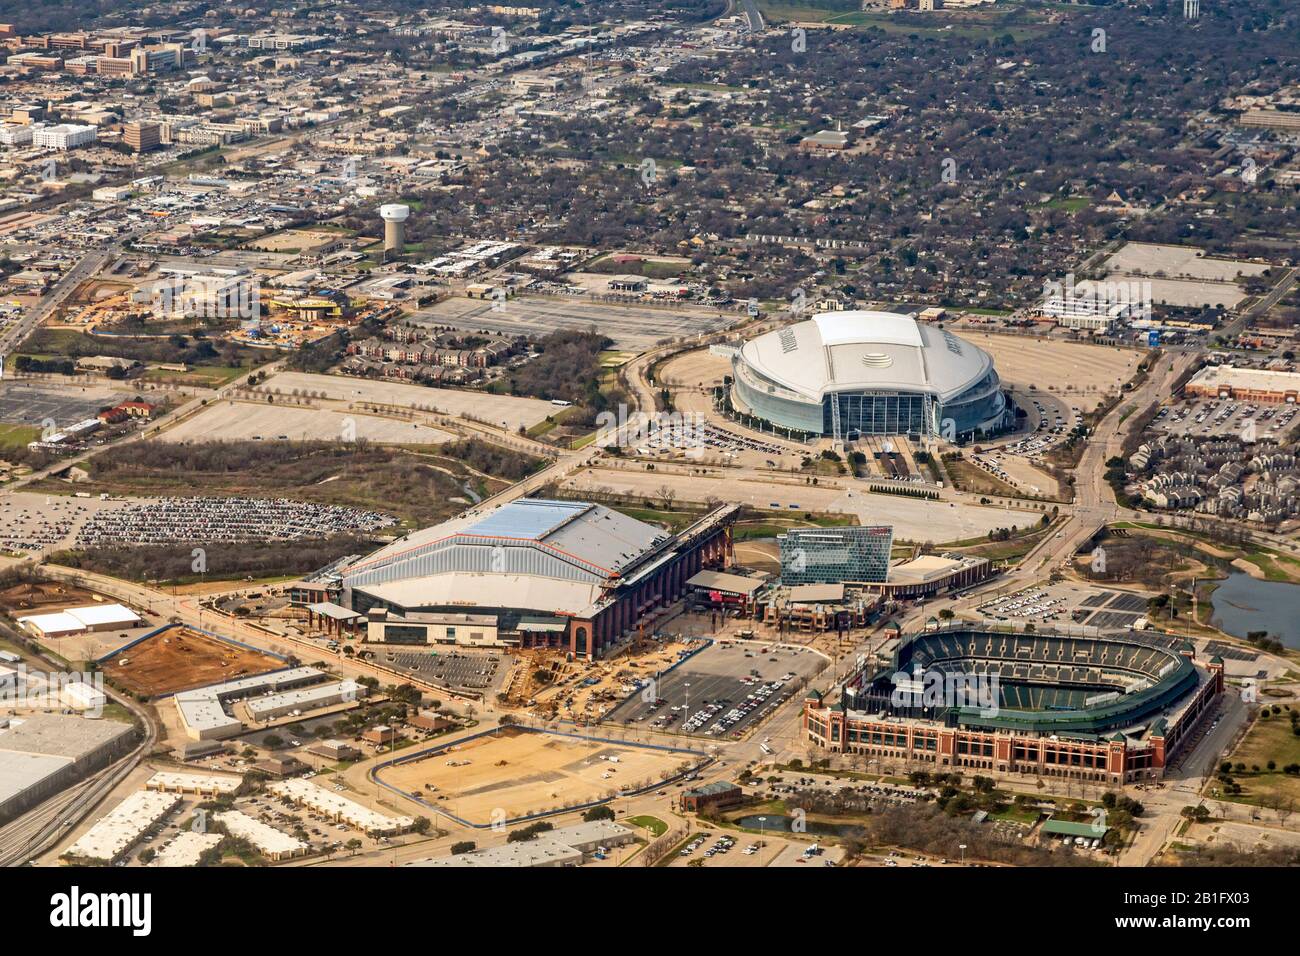 Arlington, Texas - AT&T Stadium (top), home of the Dallas Cowboys football team, in the sprawling suburbs of Dallas-Fort Worth. Below left, Globe Life Stock Photo